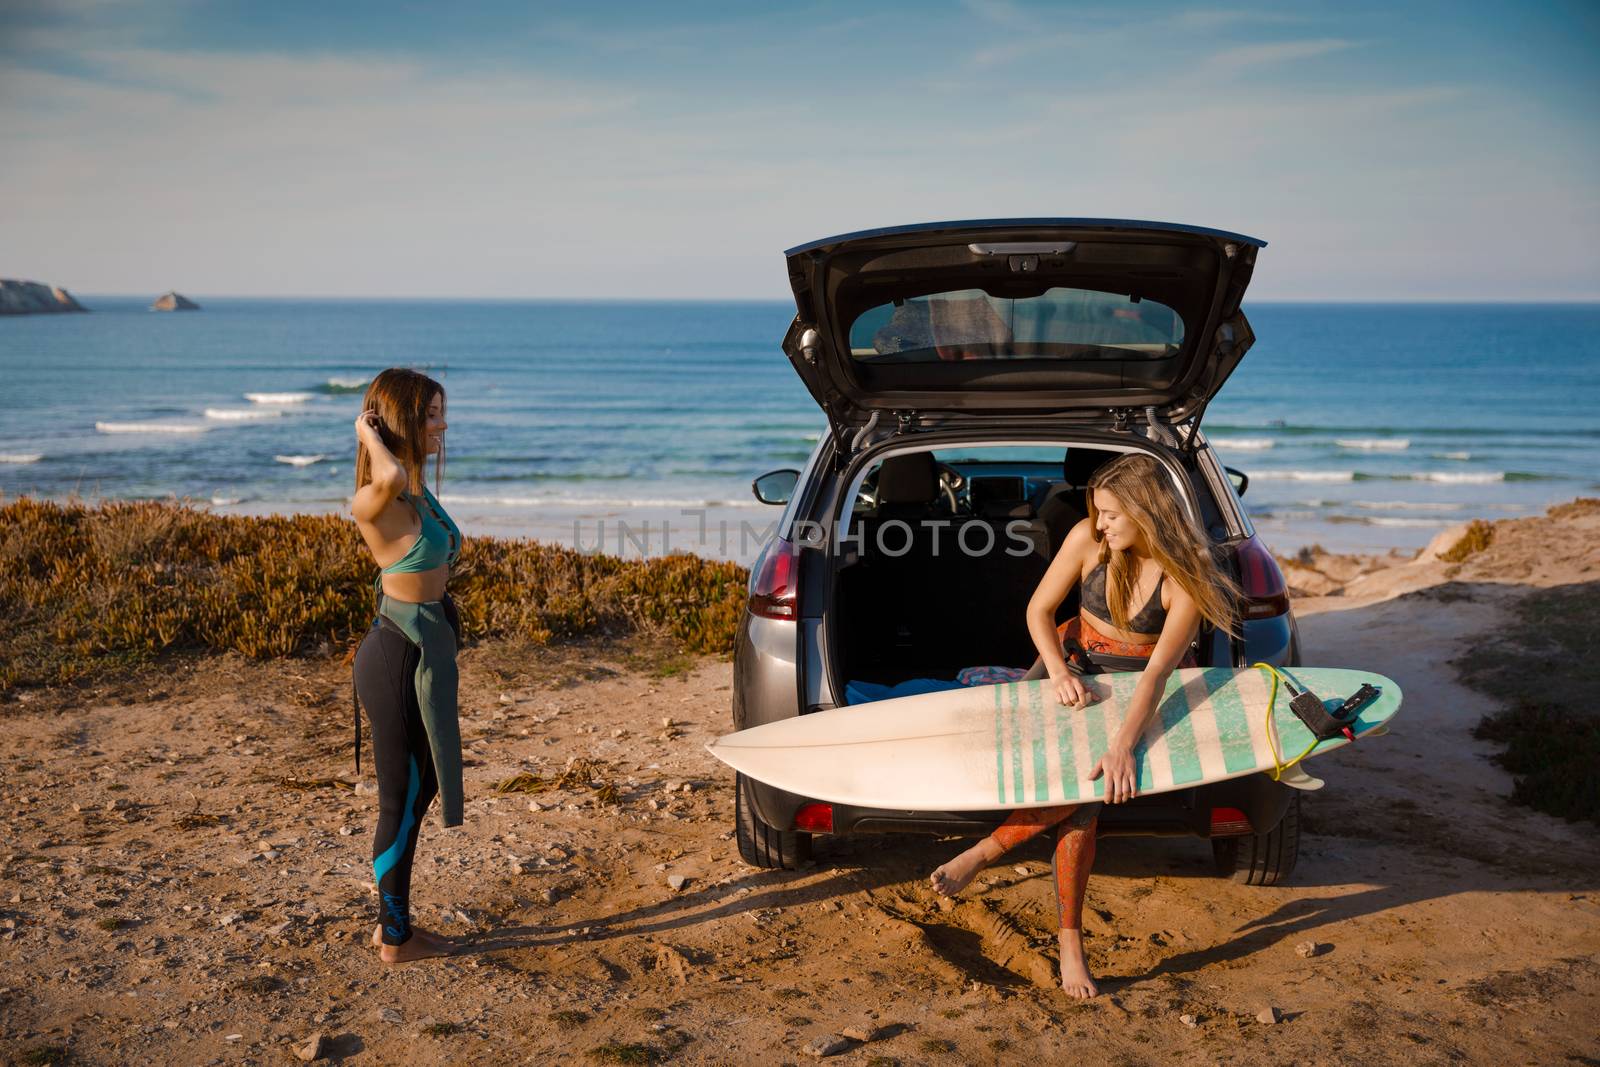 Surf and friendship Getting ready for another surf day by Iko